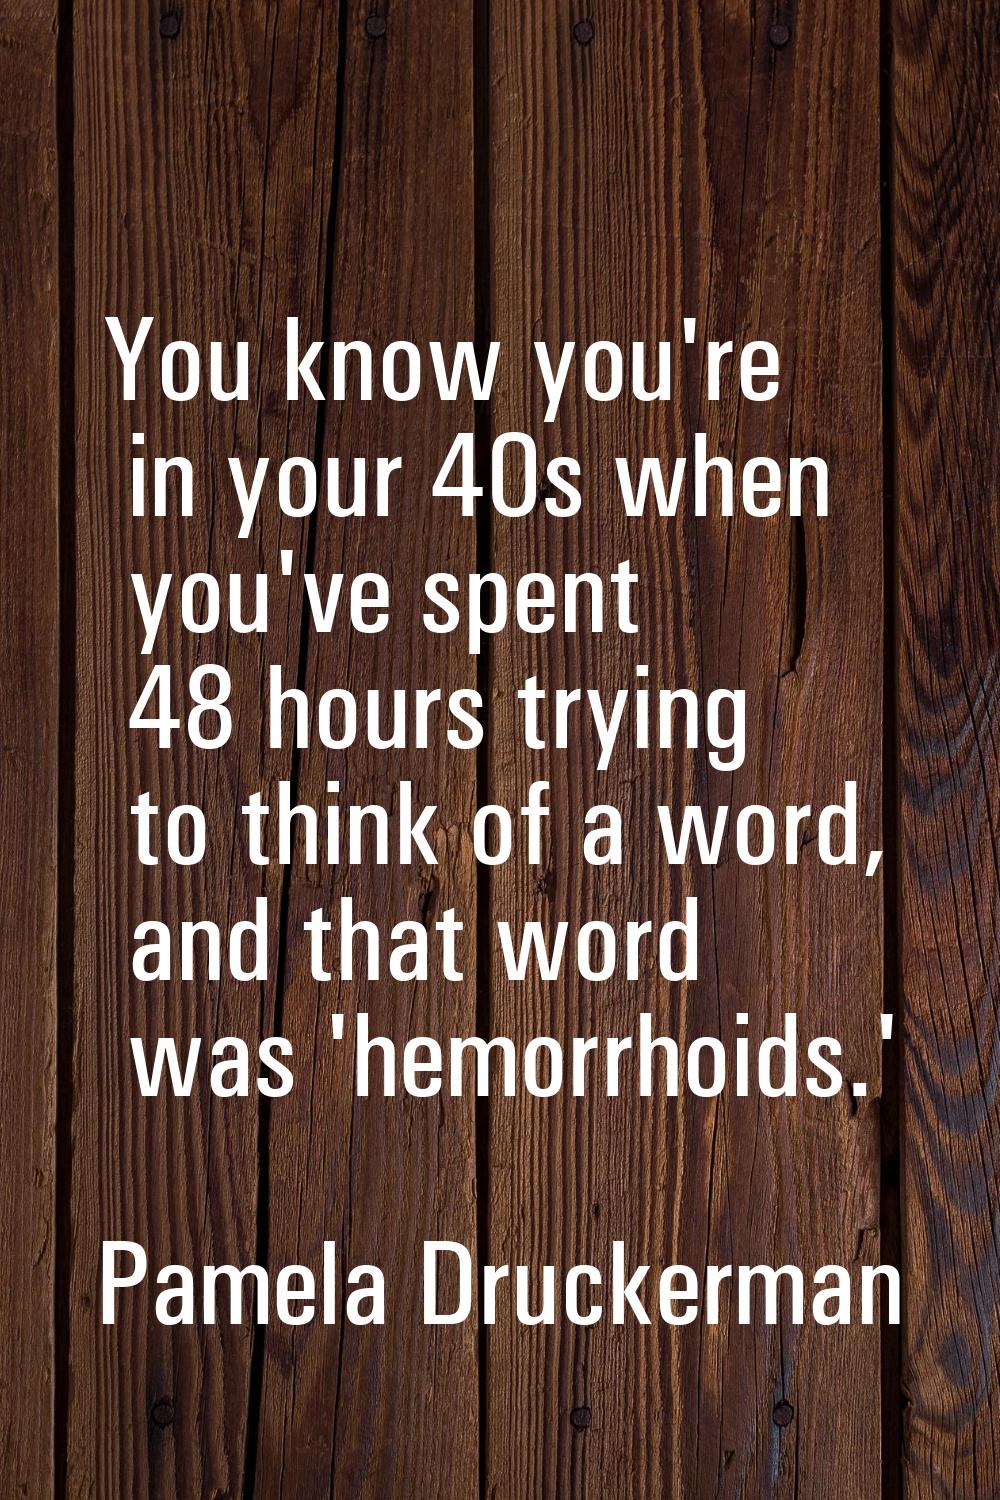 You know you're in your 40s when you've spent 48 hours trying to think of a word, and that word was